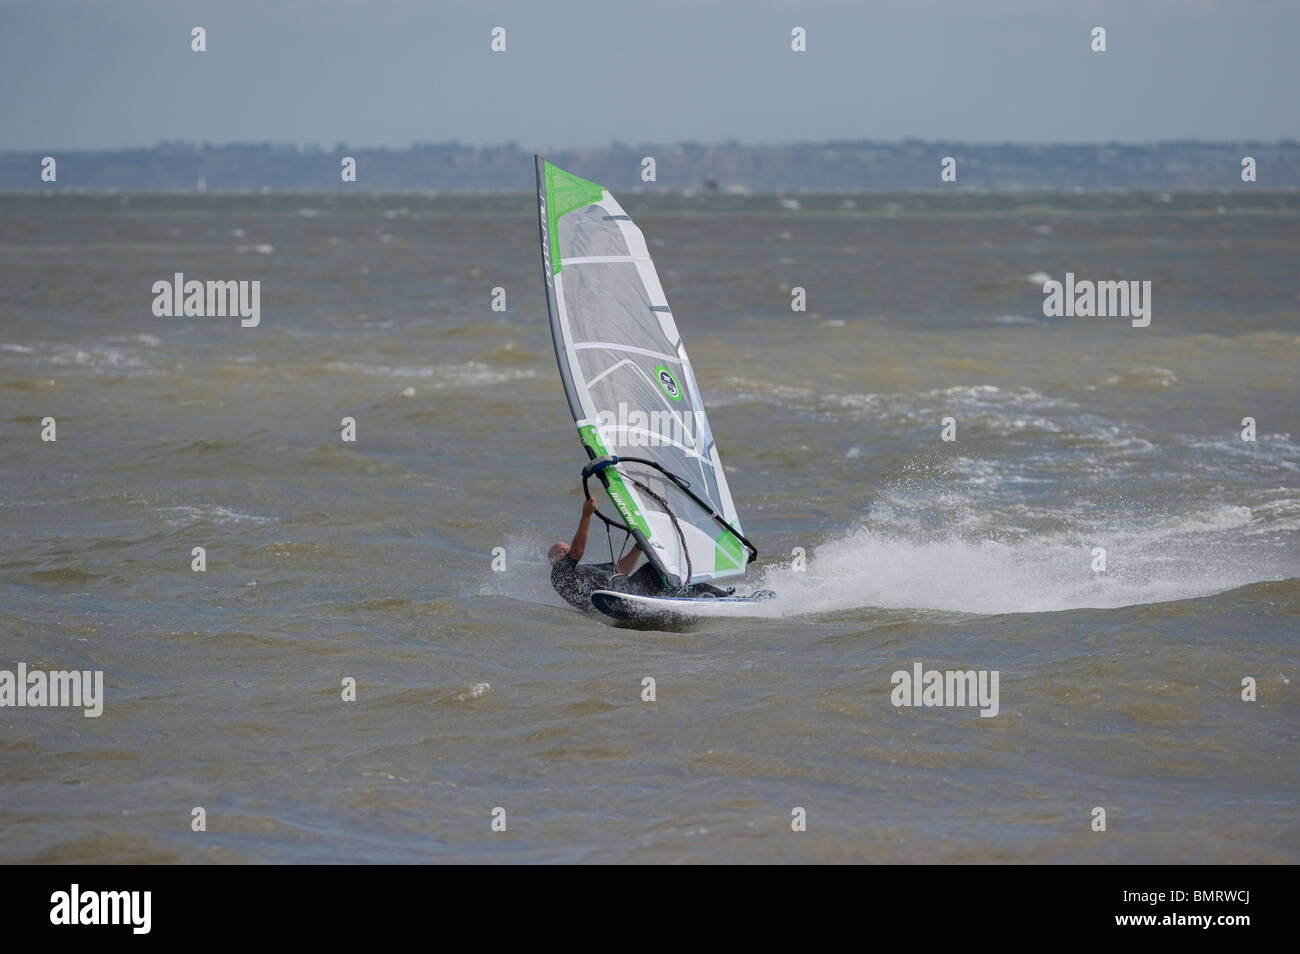 Windsurfing at East Beach, Shoeburyness, Essex, UK. This is a popular site for windsurfing and kitesurfing. Stock Photo